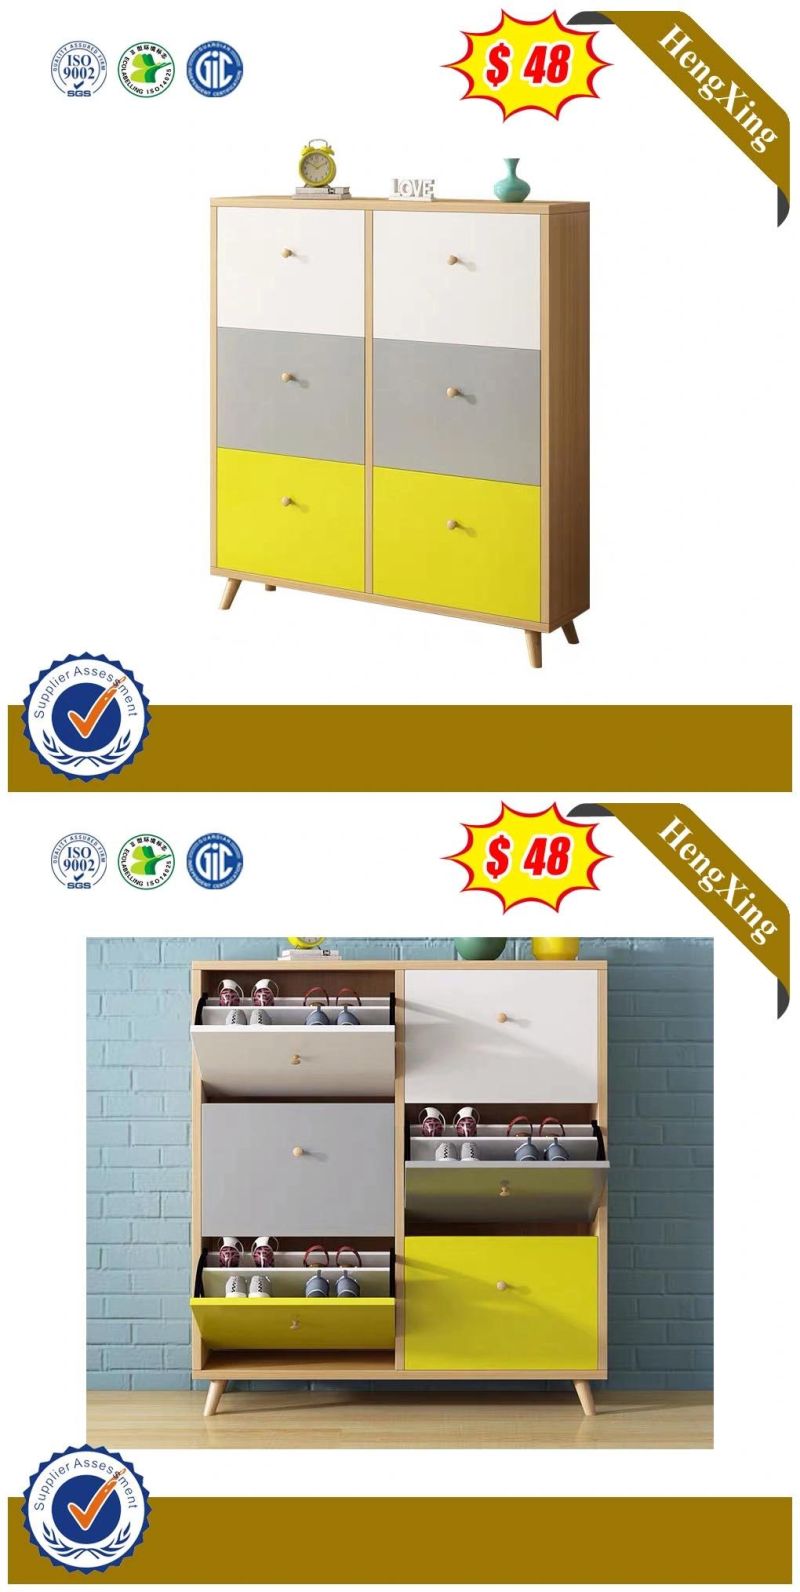 China Wholesale Living Room Furniture Set Coffee Table Storage Kitchen Cabinet Rotating Shoe Cabinets